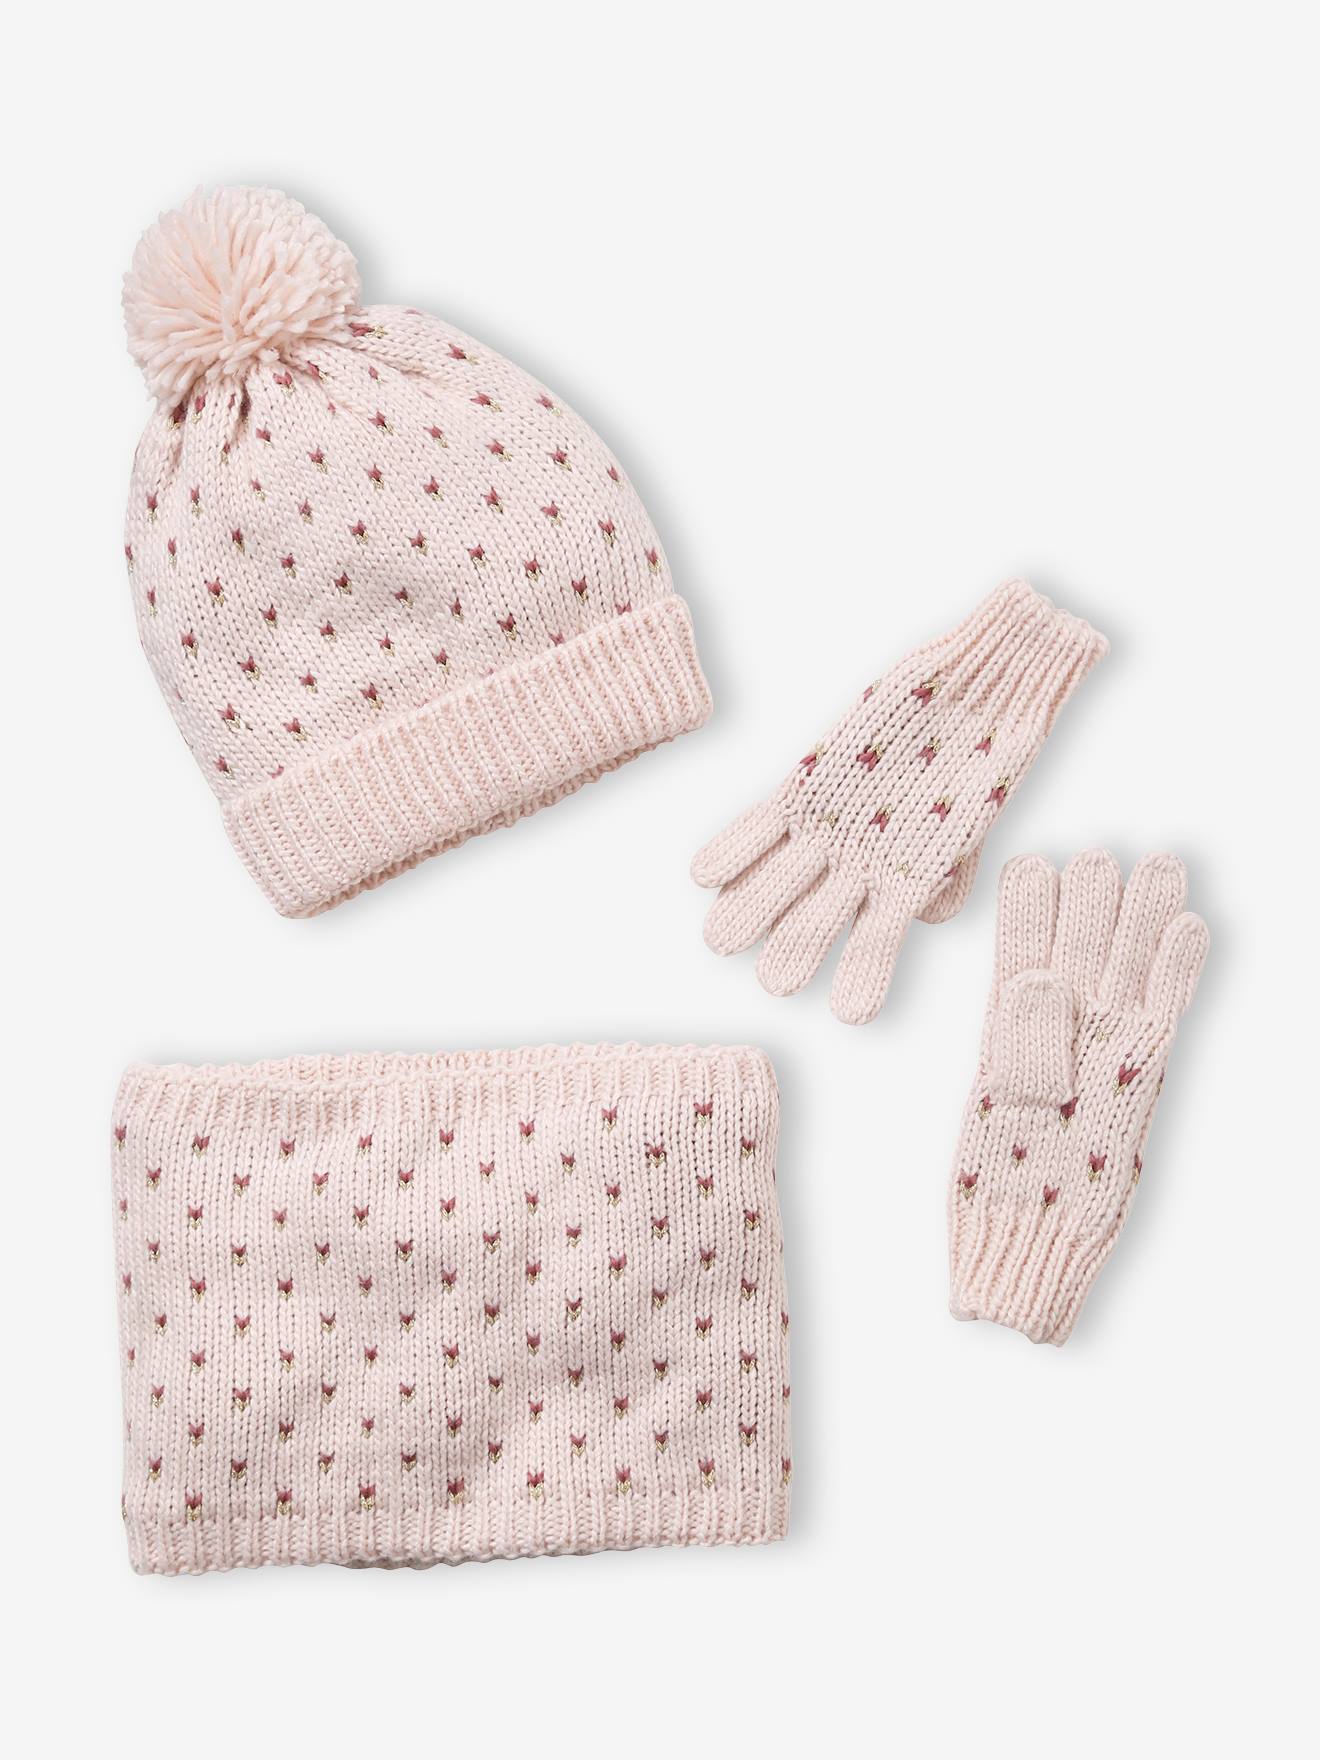 NIce Caps Girls Warm Sherpa Lined Cable Knitted Glove/Hat/Scarf 3 Piece Set 